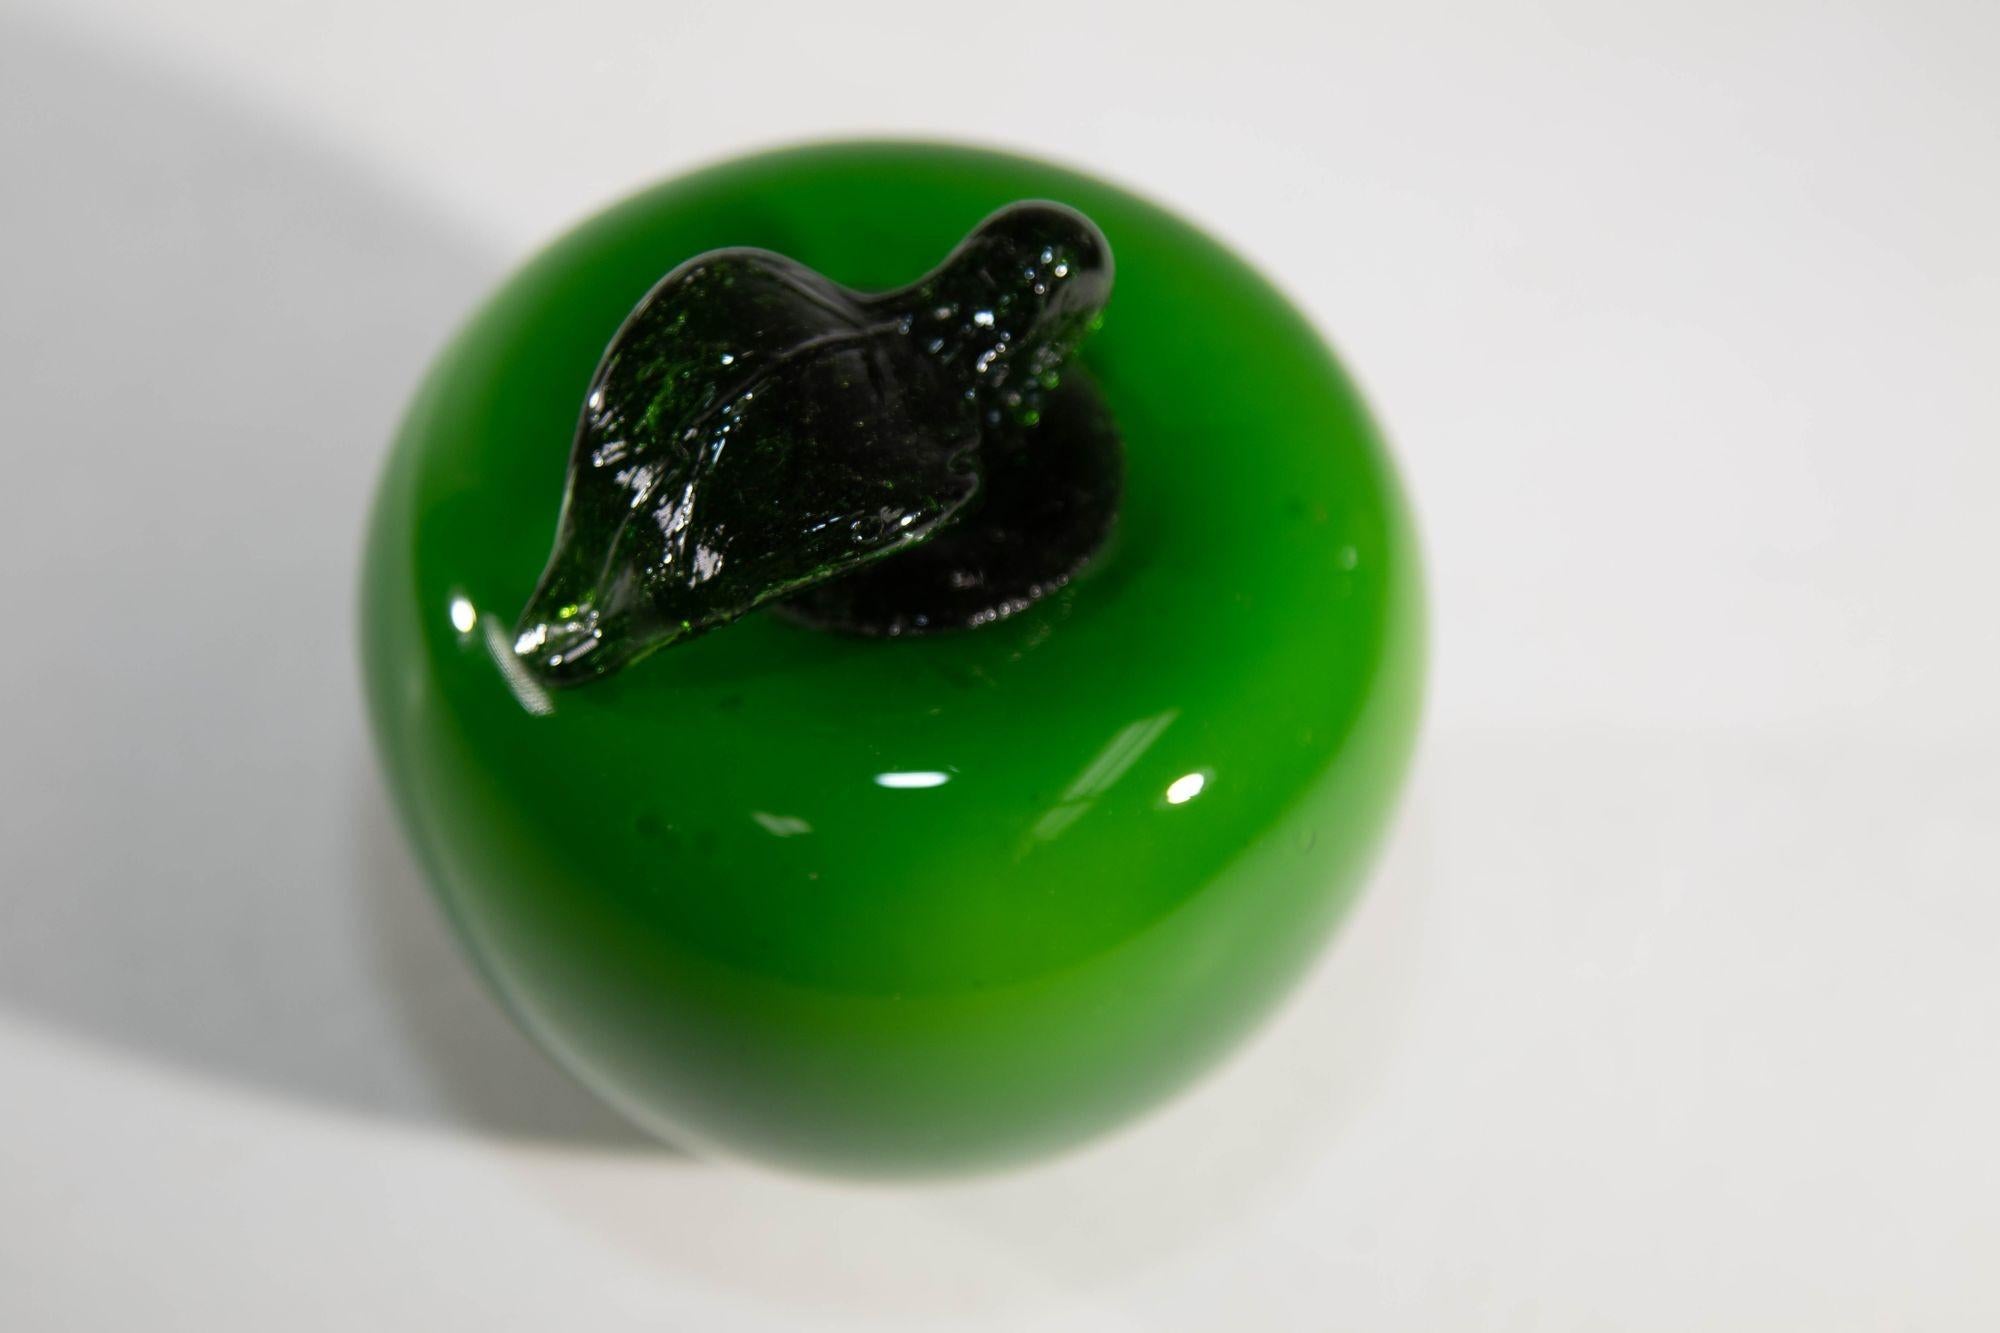 Italian Vintage Murano Blown Glass Bright Green Apple Paperweight 1980s For Sale